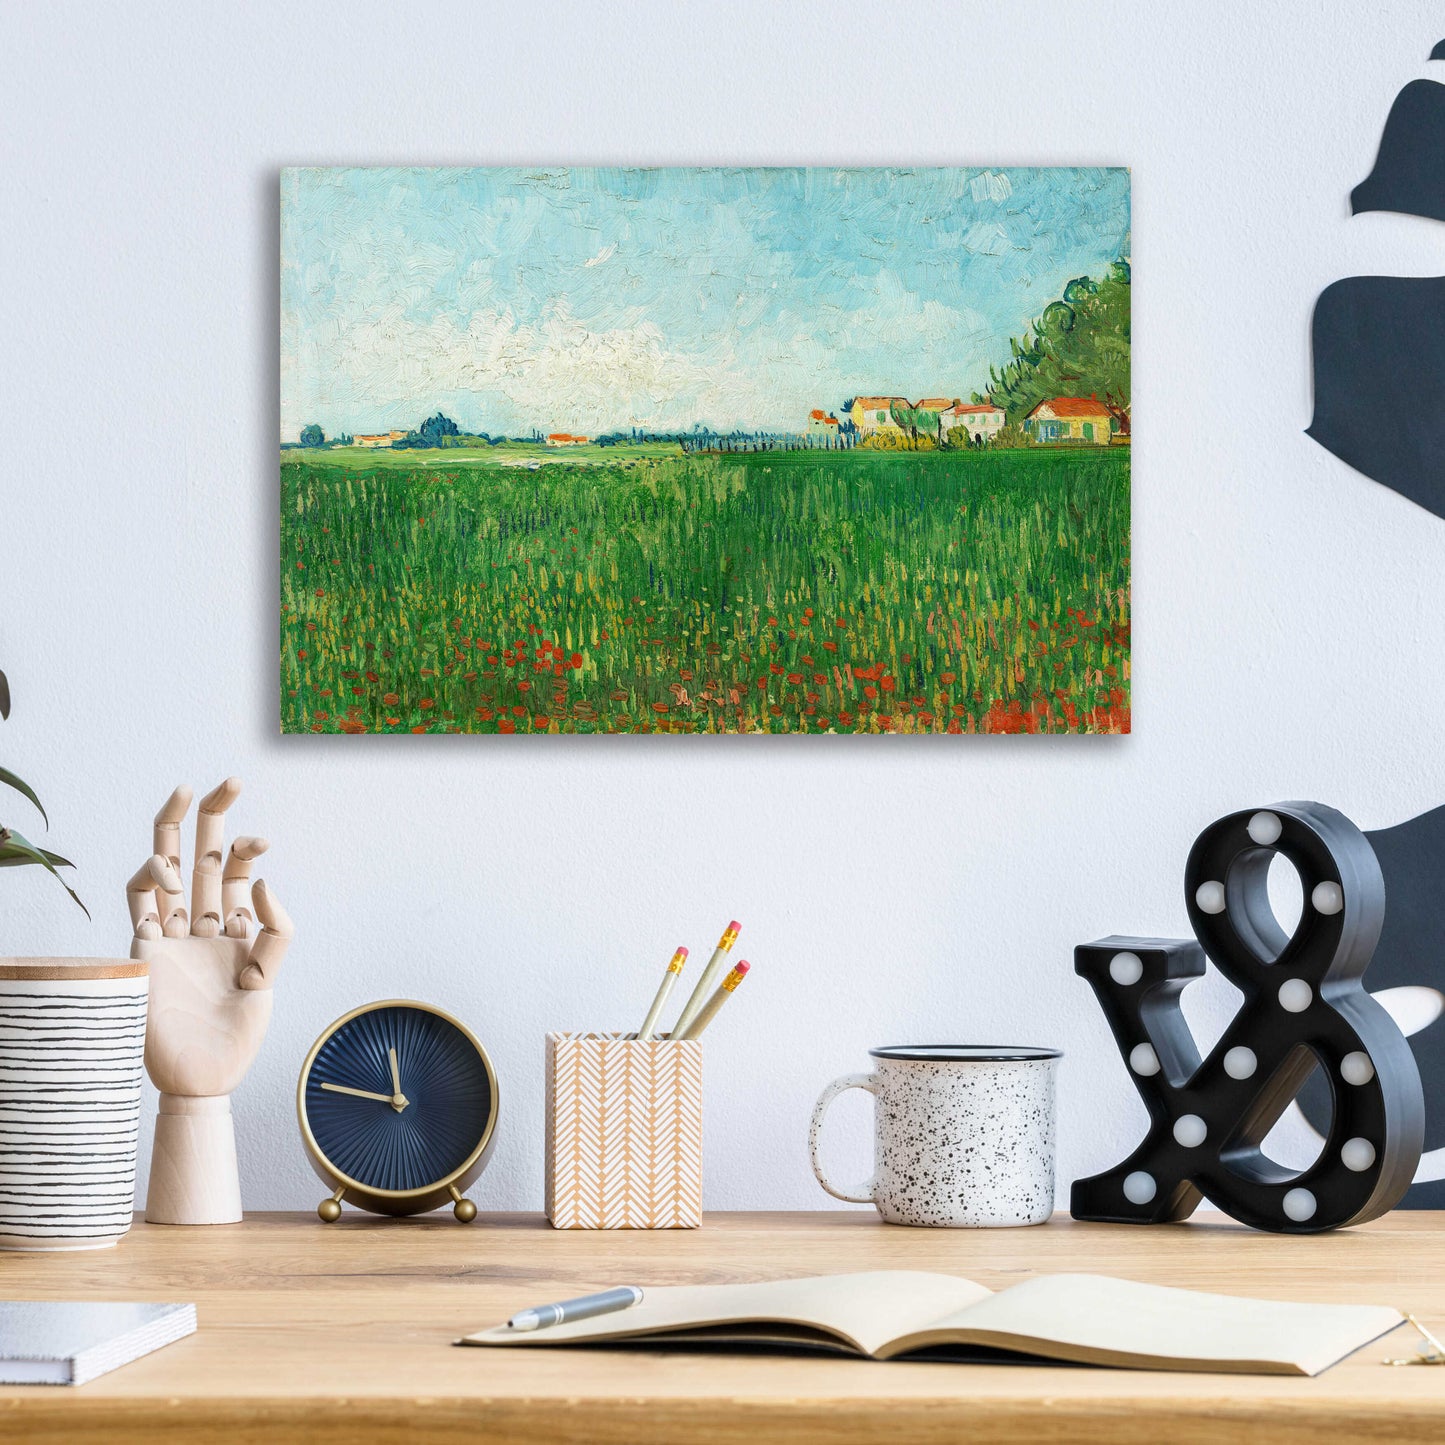 Epic Art 'Field With Poppies' by Vincent Van Gogh, Acrylic Glass Wall Art,16x12